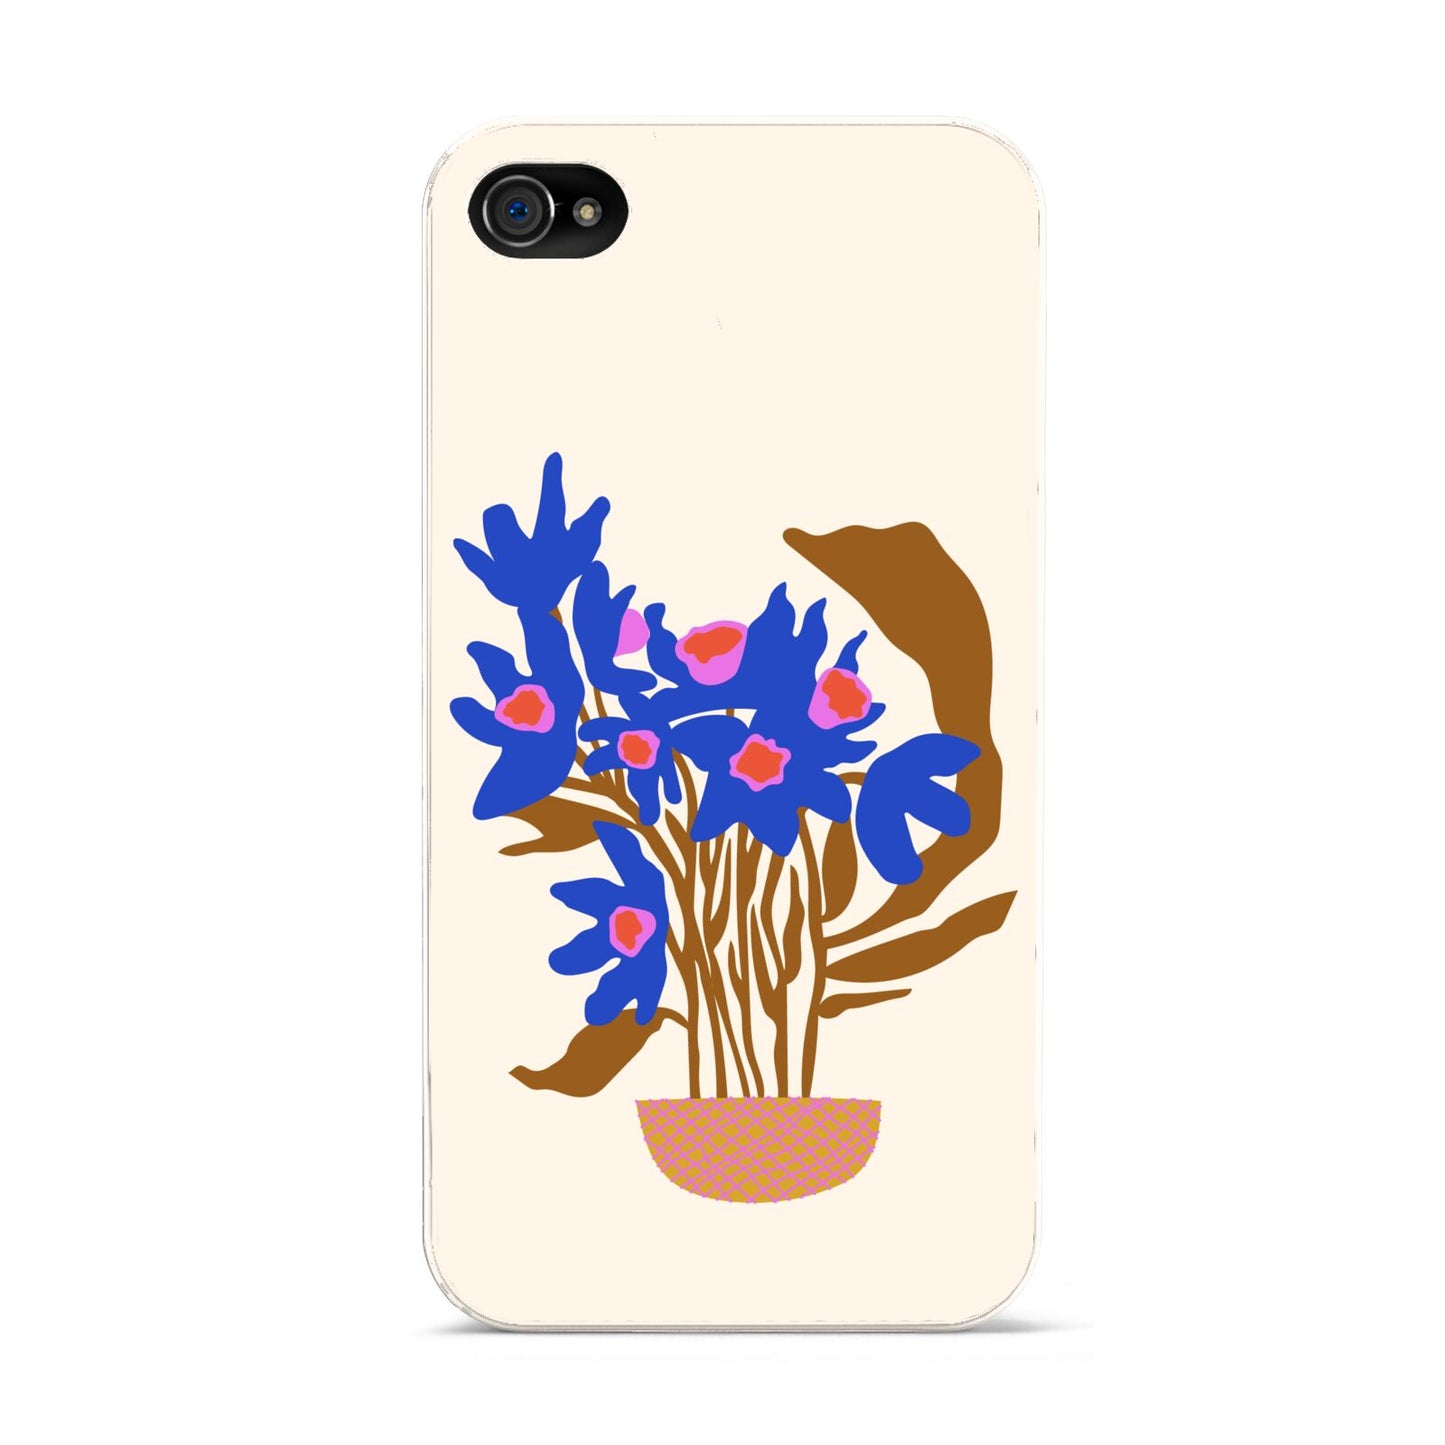 Flowers in a Vase Apple iPhone 4s Case